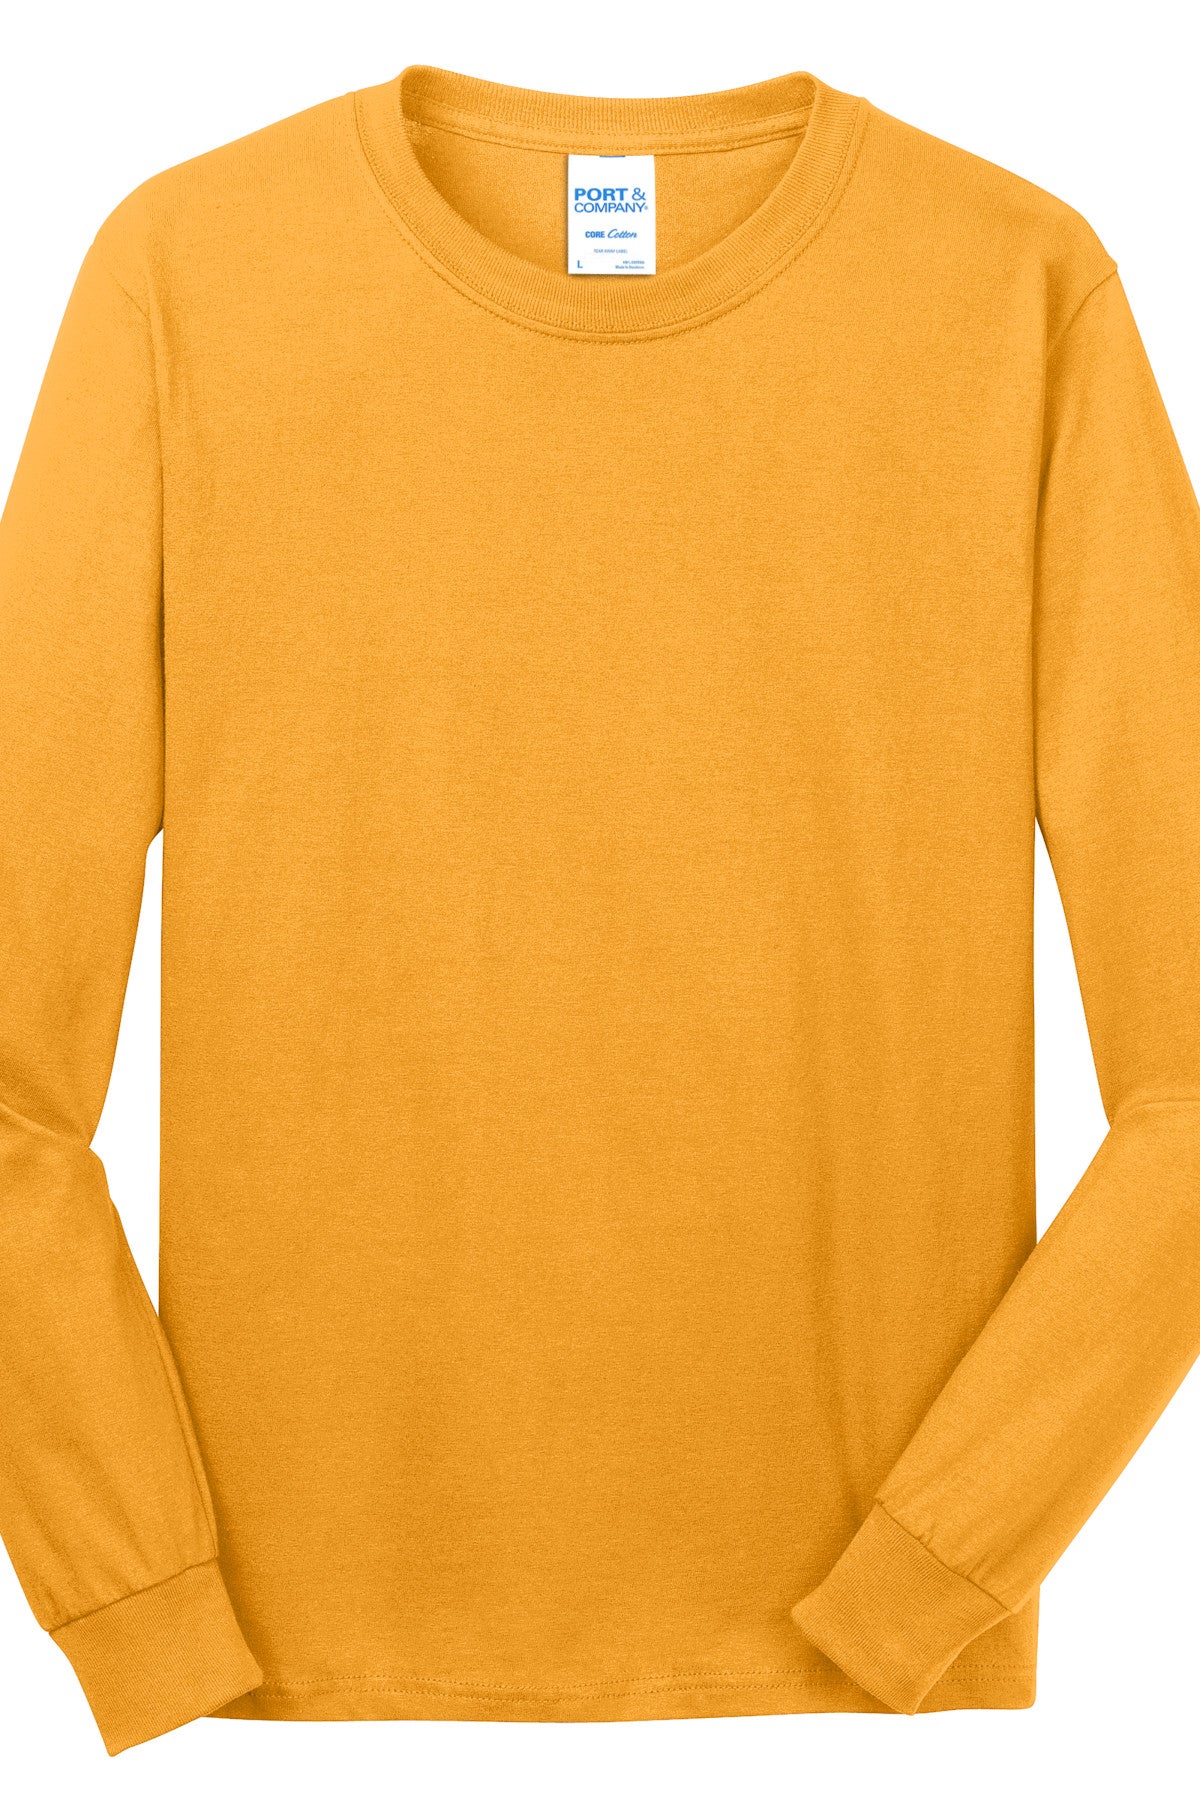 Port & Company® Pc54Ls Long Sleeve Cotton T-Shirt Ad Small / Gold